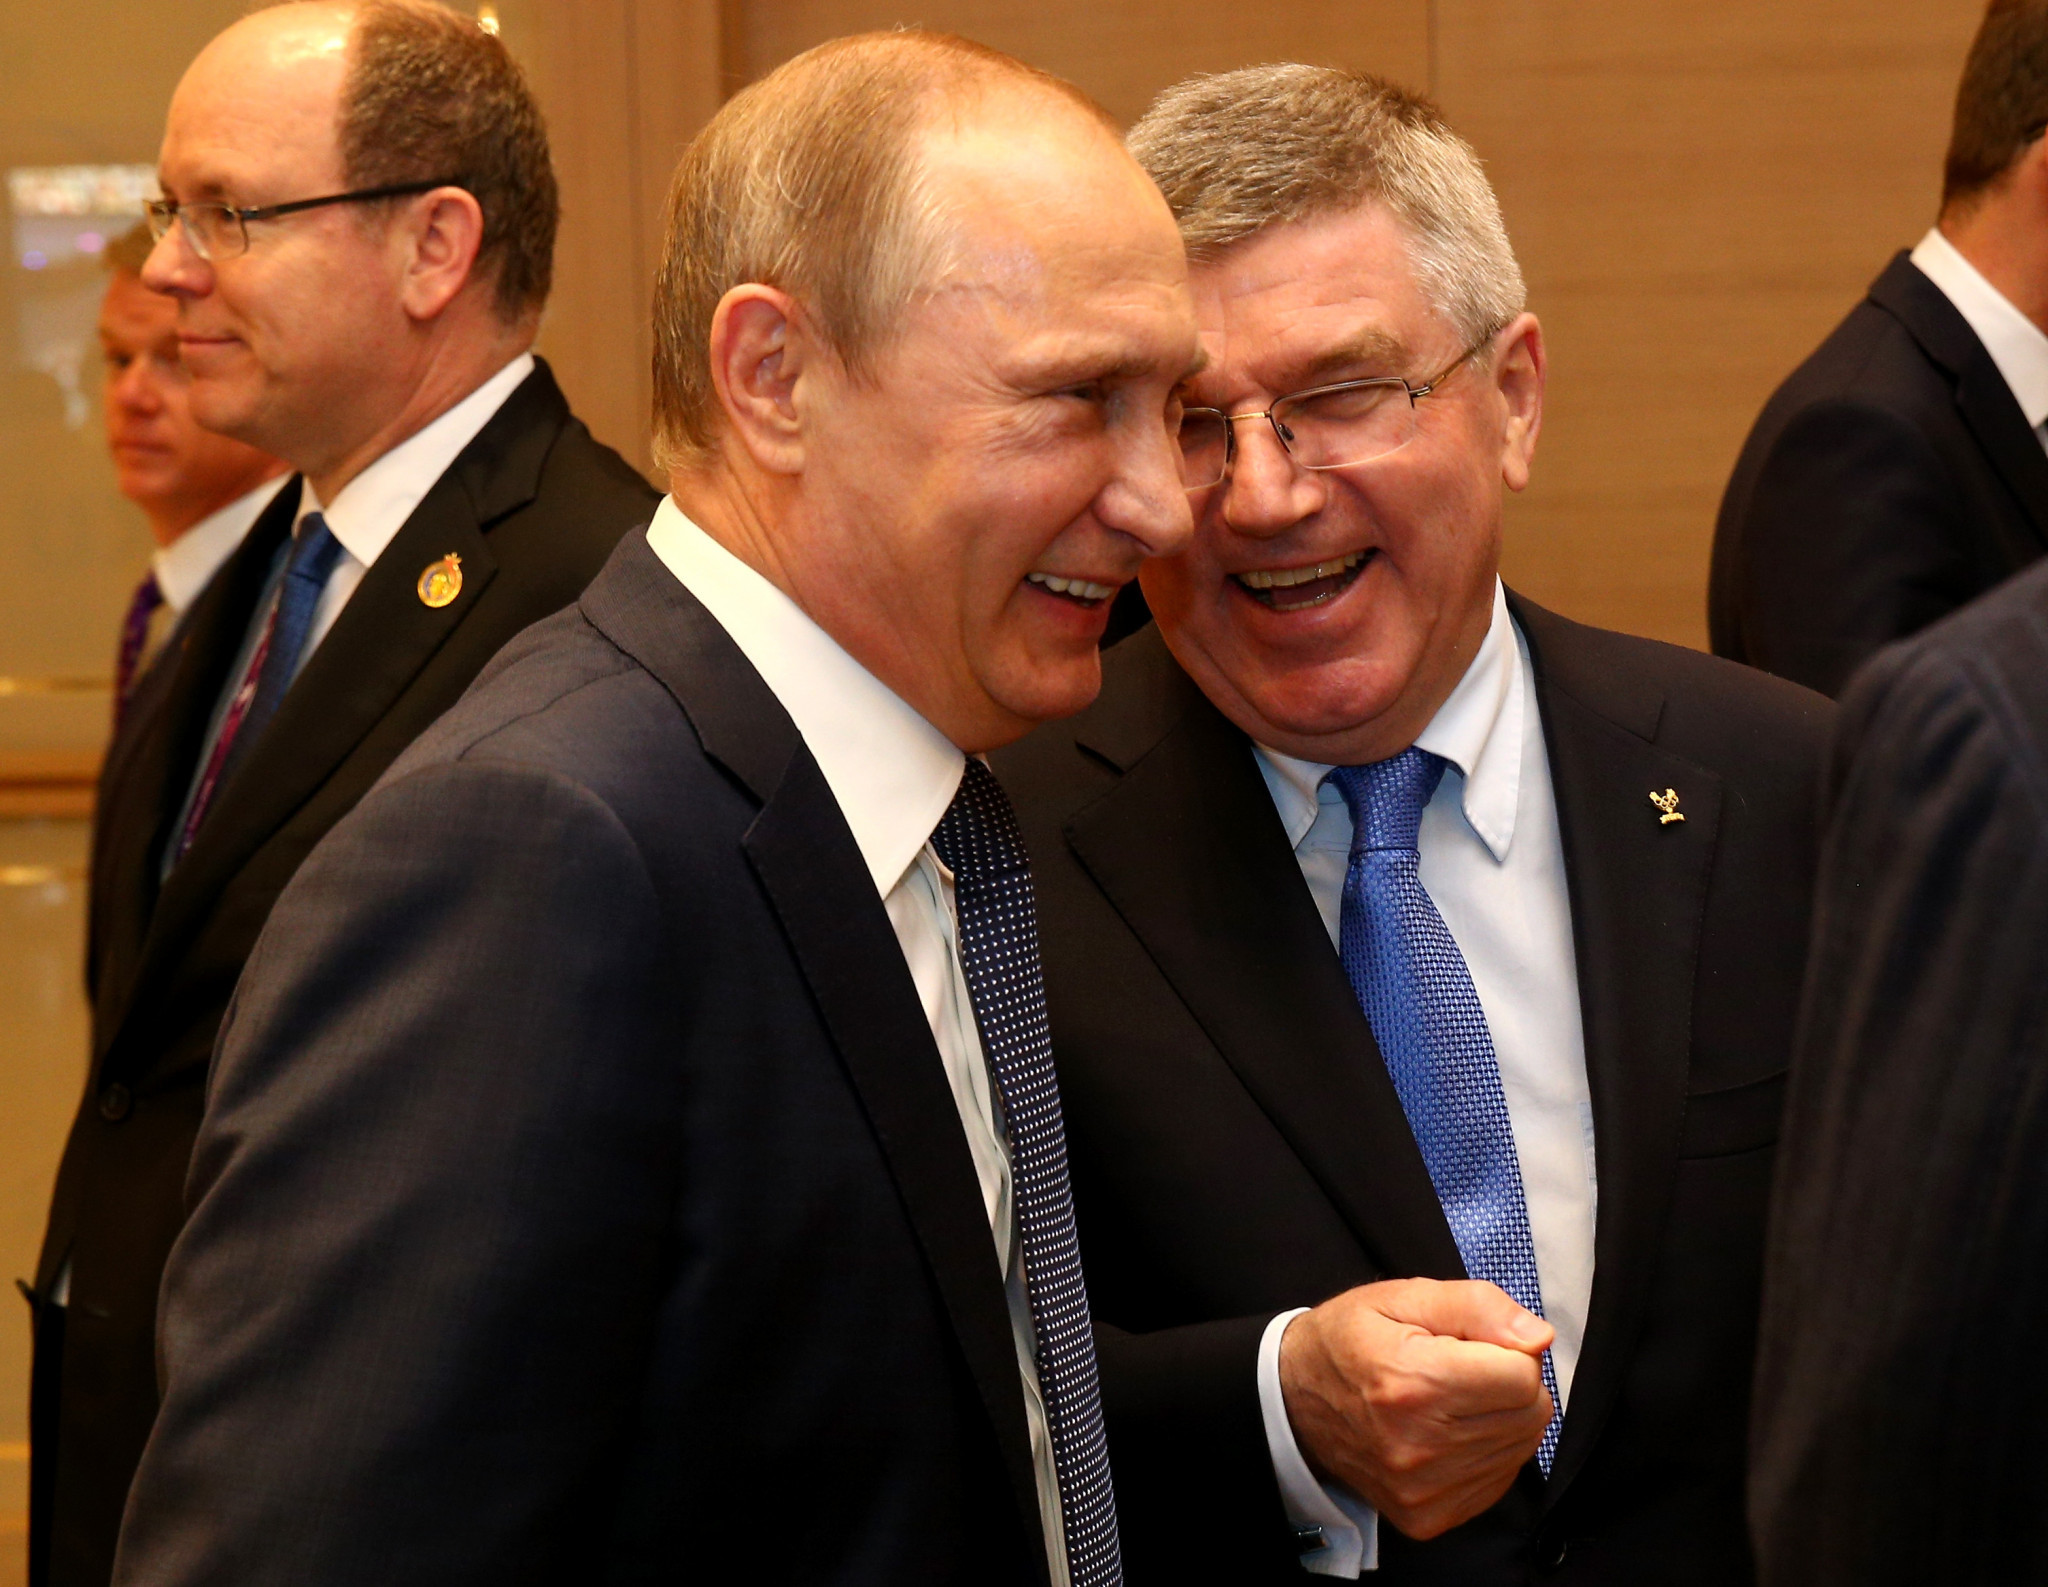 Thomas Bach, right, claims to be no longer close to Russian President Vladimir Putin but is seemingly seeking a 